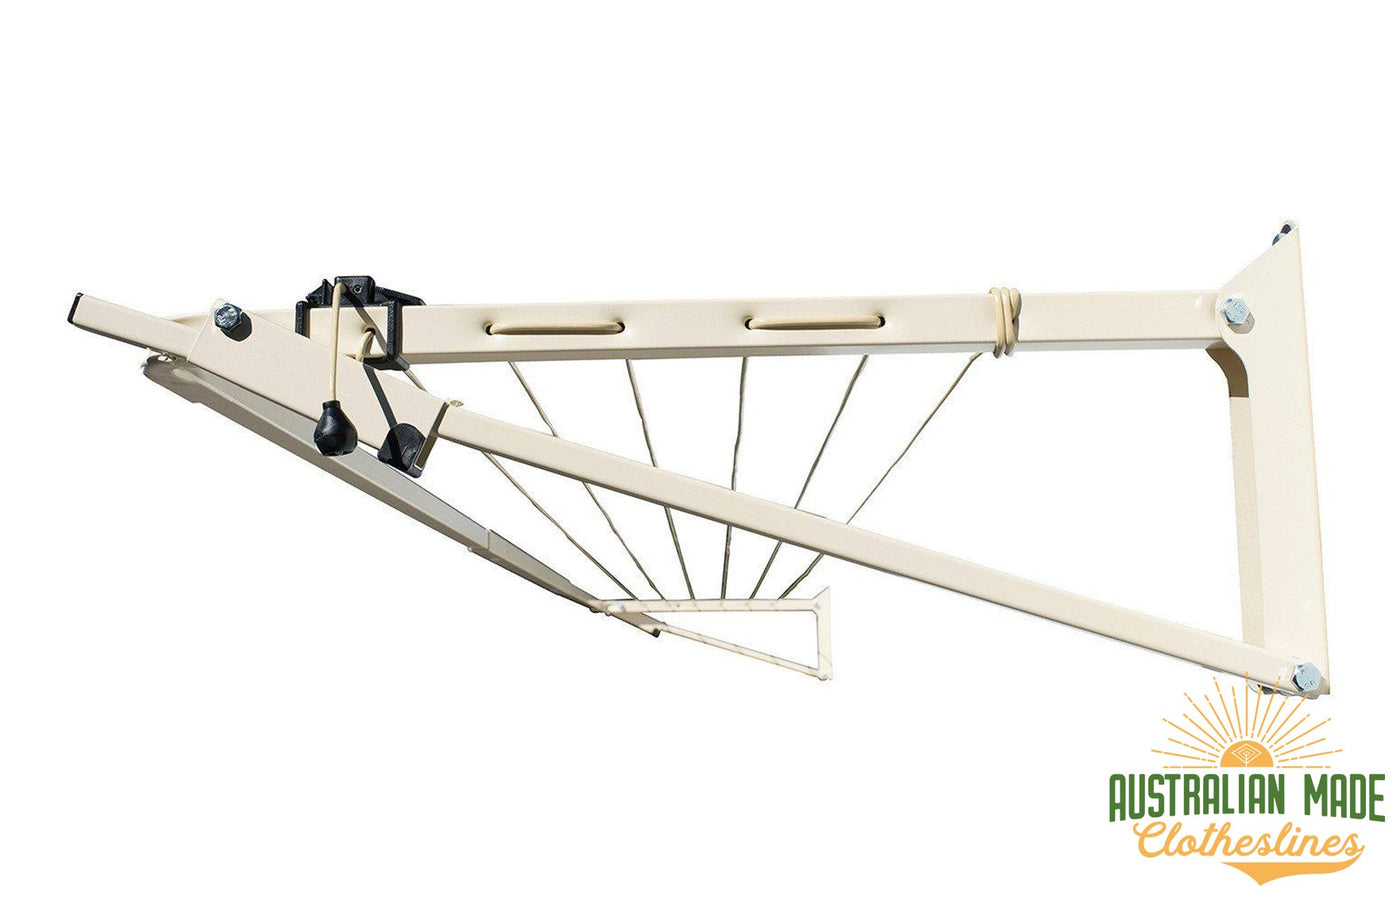 Austral Slenderline 20 Clothesline - Classic Cream Right Side View - Australian Made Clotheslines